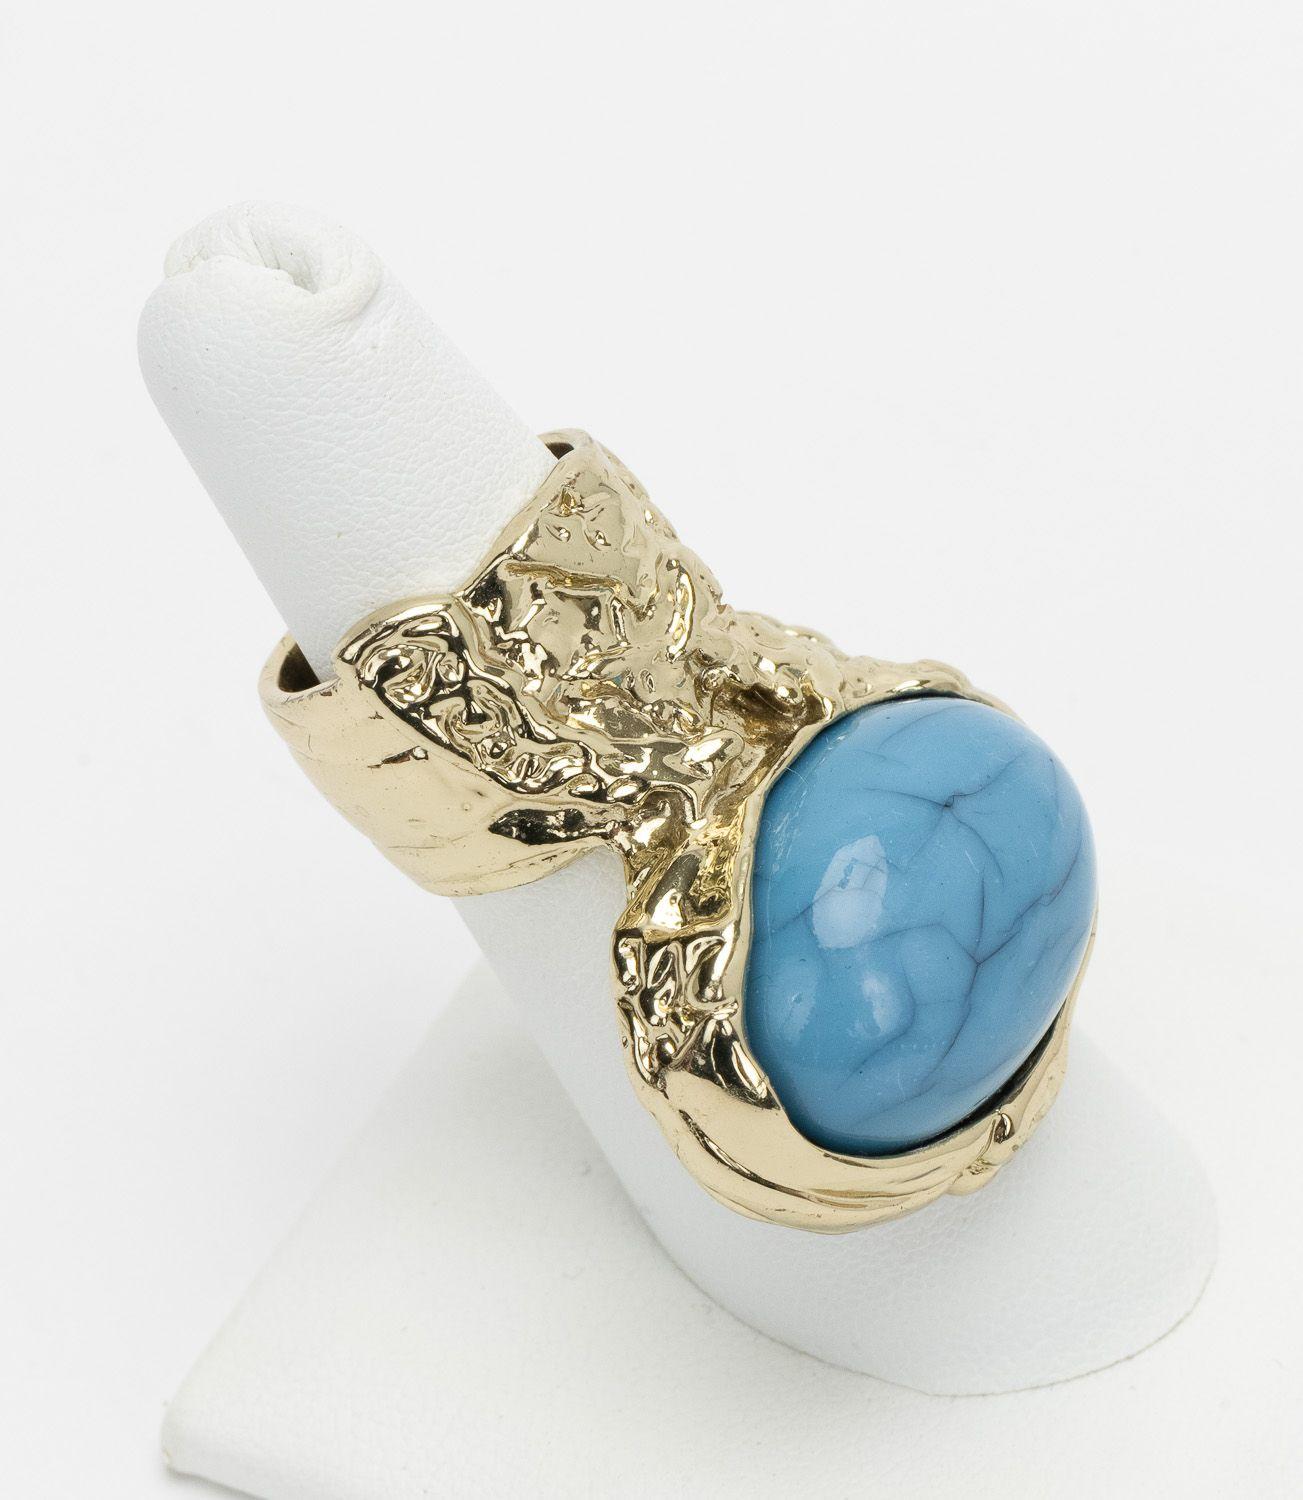 Saint Laurent Ring in Gold with a big Turquoise stones. Comes in size 6. In excellent condition.